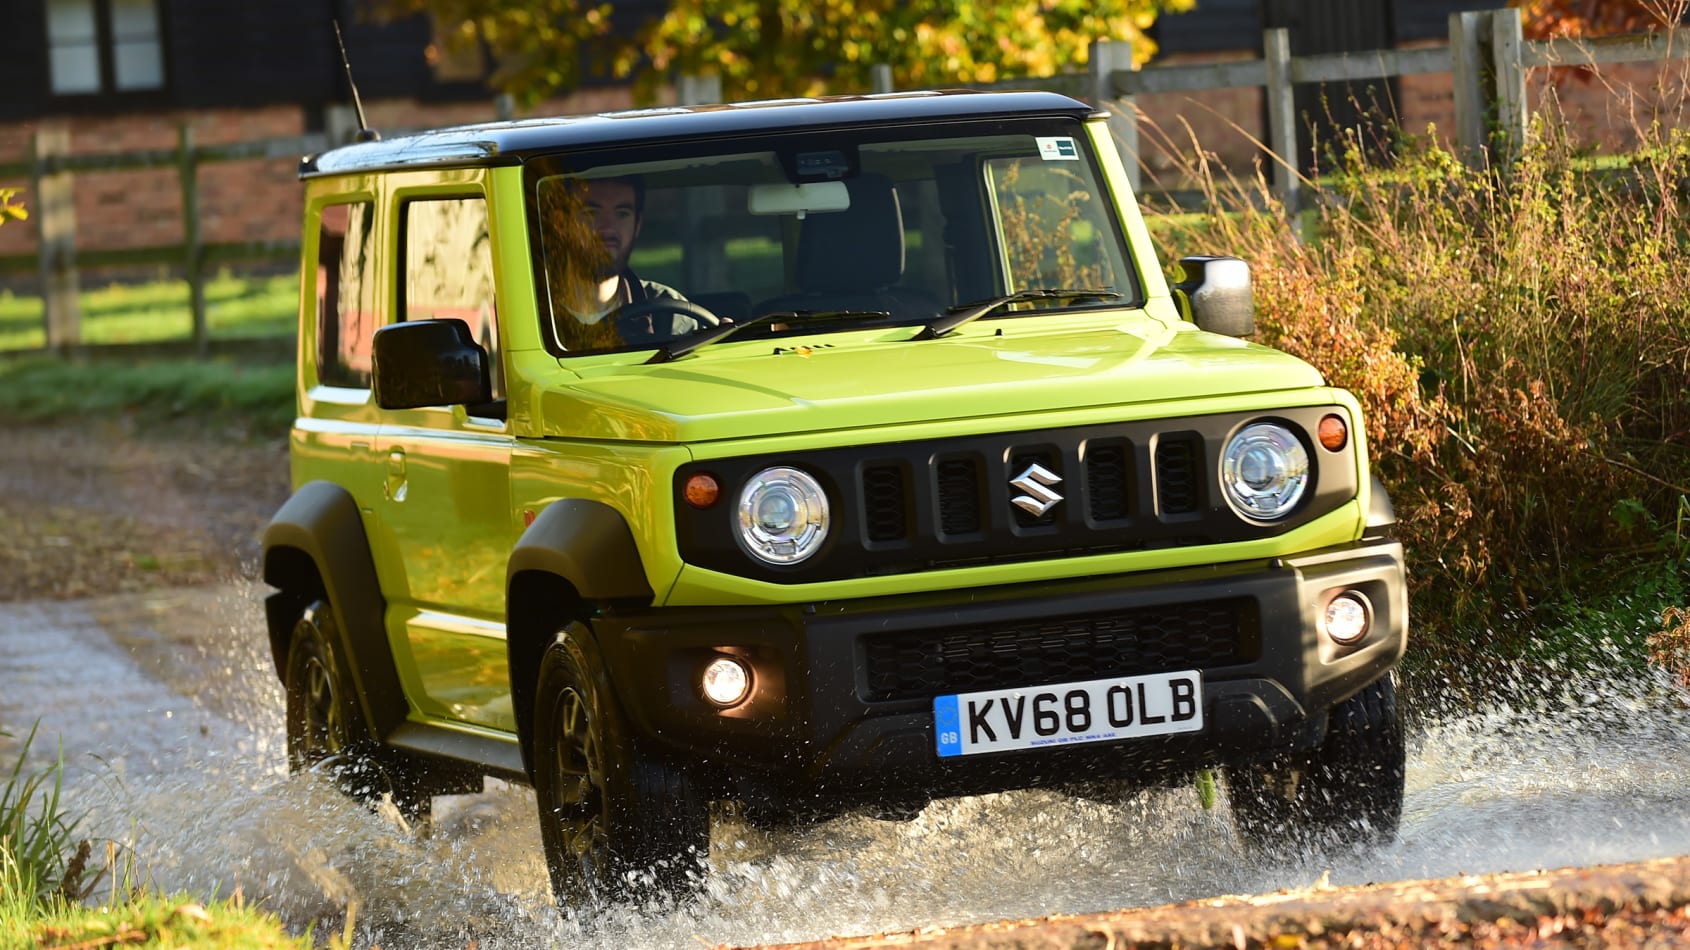 Suzuki Jimny axed from Europe over emissions regulations